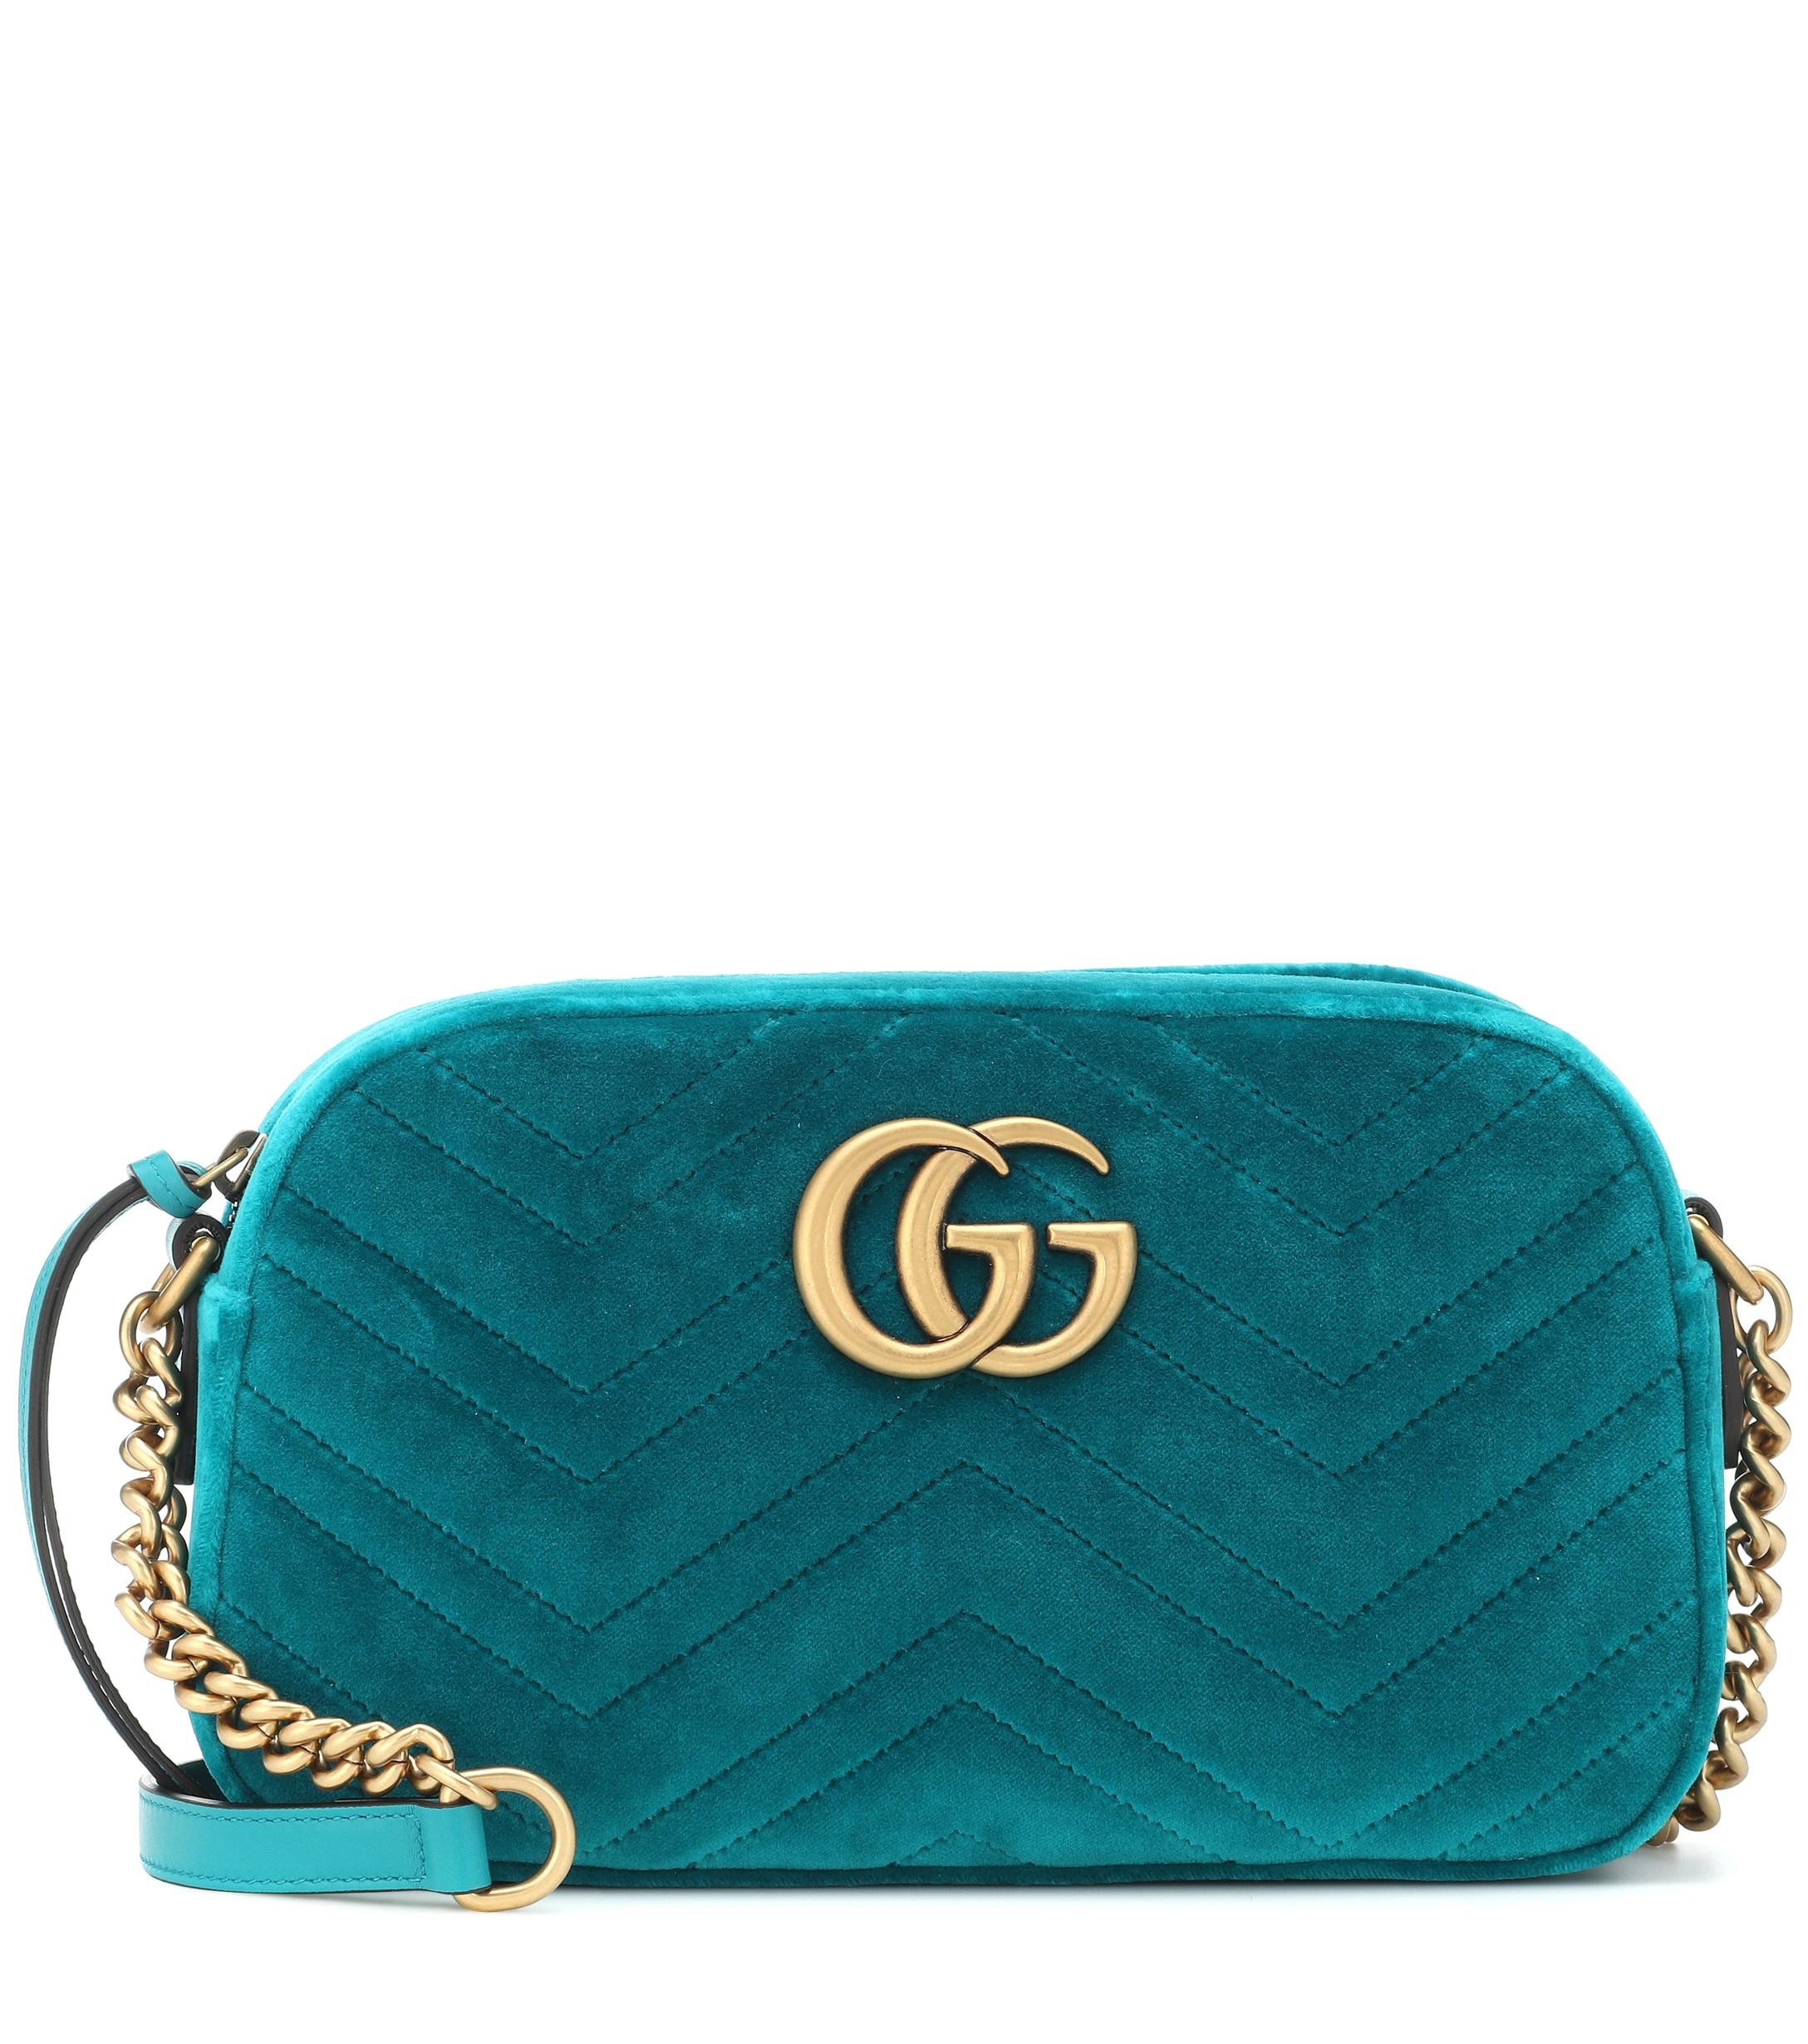 Gucci GG Marmont Small Shoulder Bag in Blue - Lyst